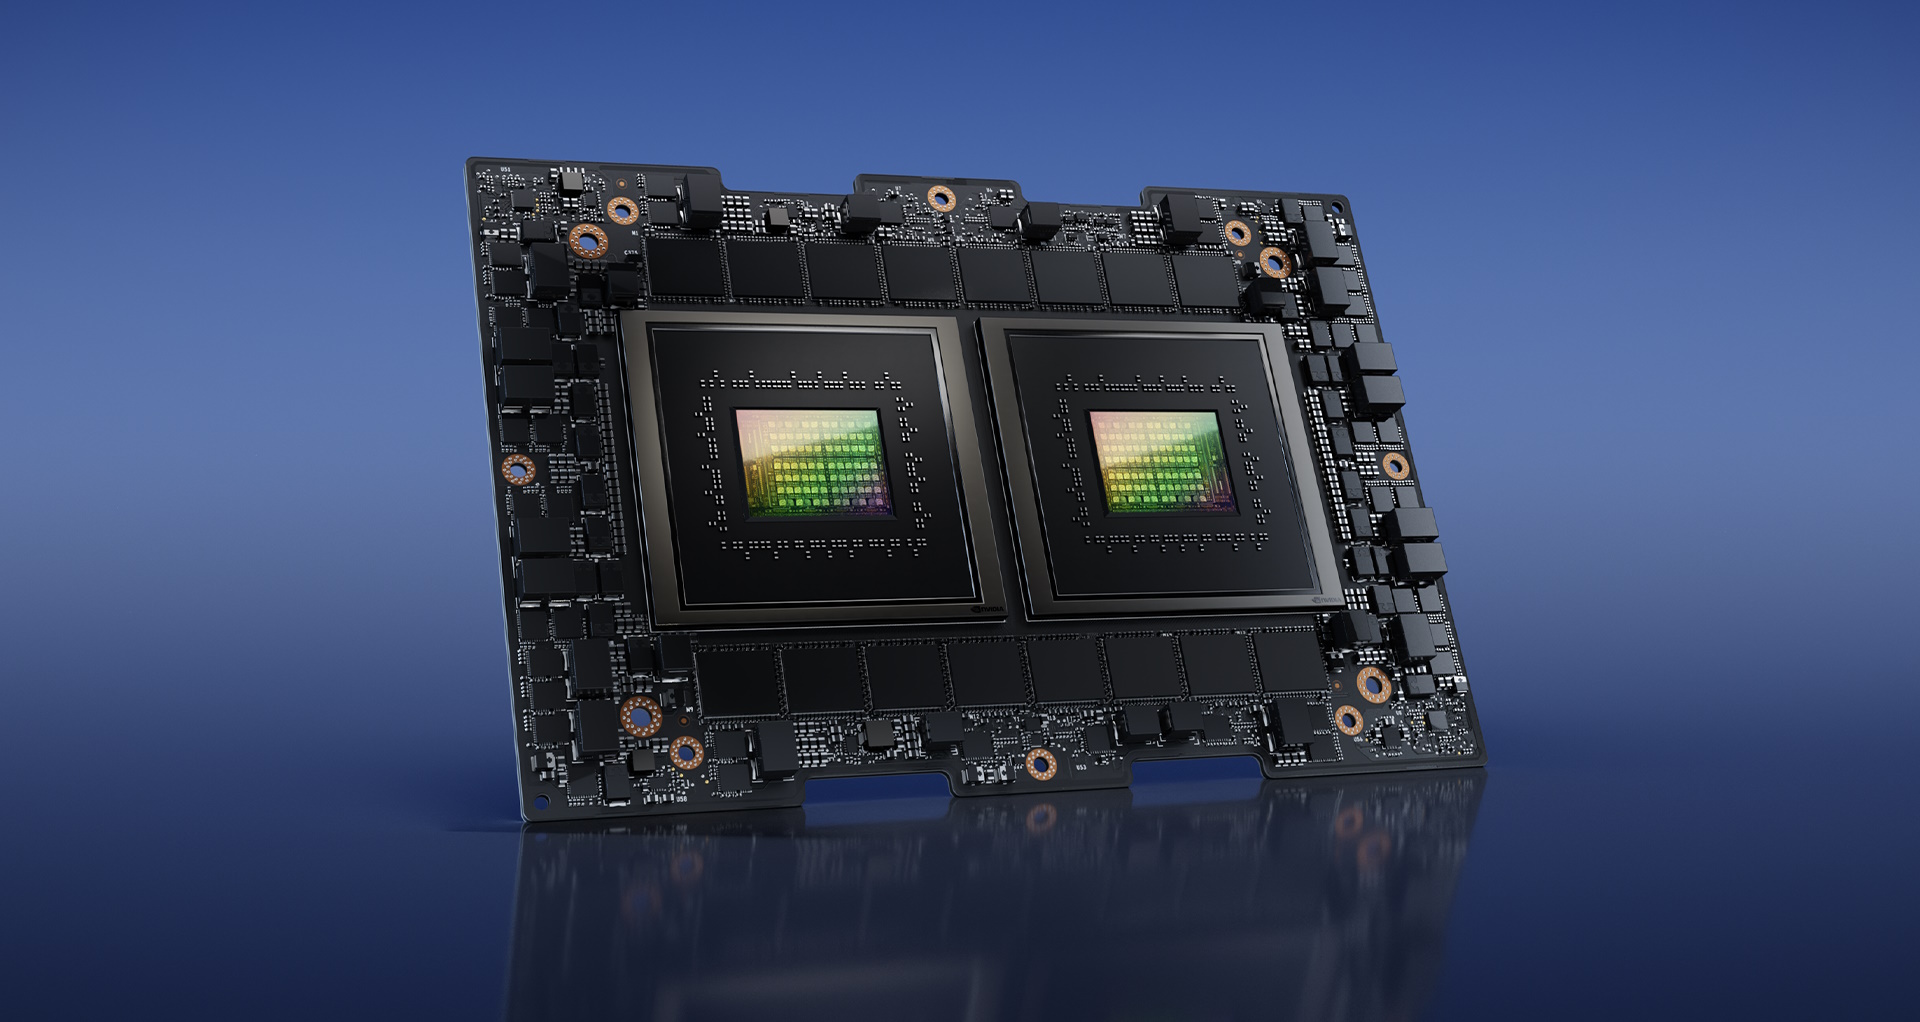 In tests of real workloads, the NVIDIA Grace CPU Superchip scored 2x performance gains over x86 processors at the same power envelope across major dat